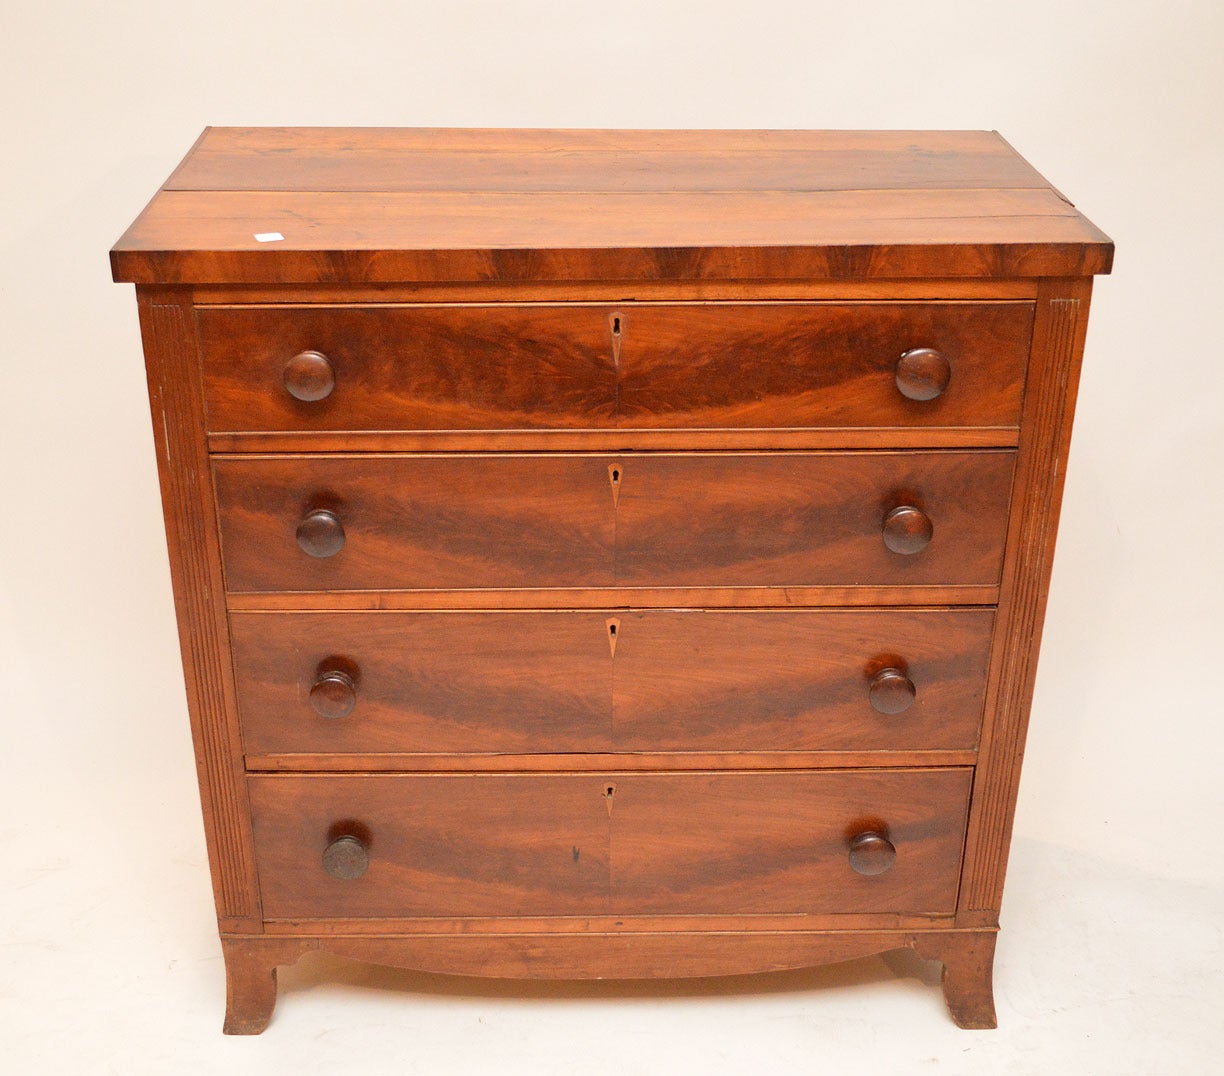 This is a very nice original Federal American chest of drawers in mahogany sitting on splayed feet.
The drawer linings are solid wood with dovetail joints the wooden knobs are all original the escutcheon are satin wood.
The back as well as the